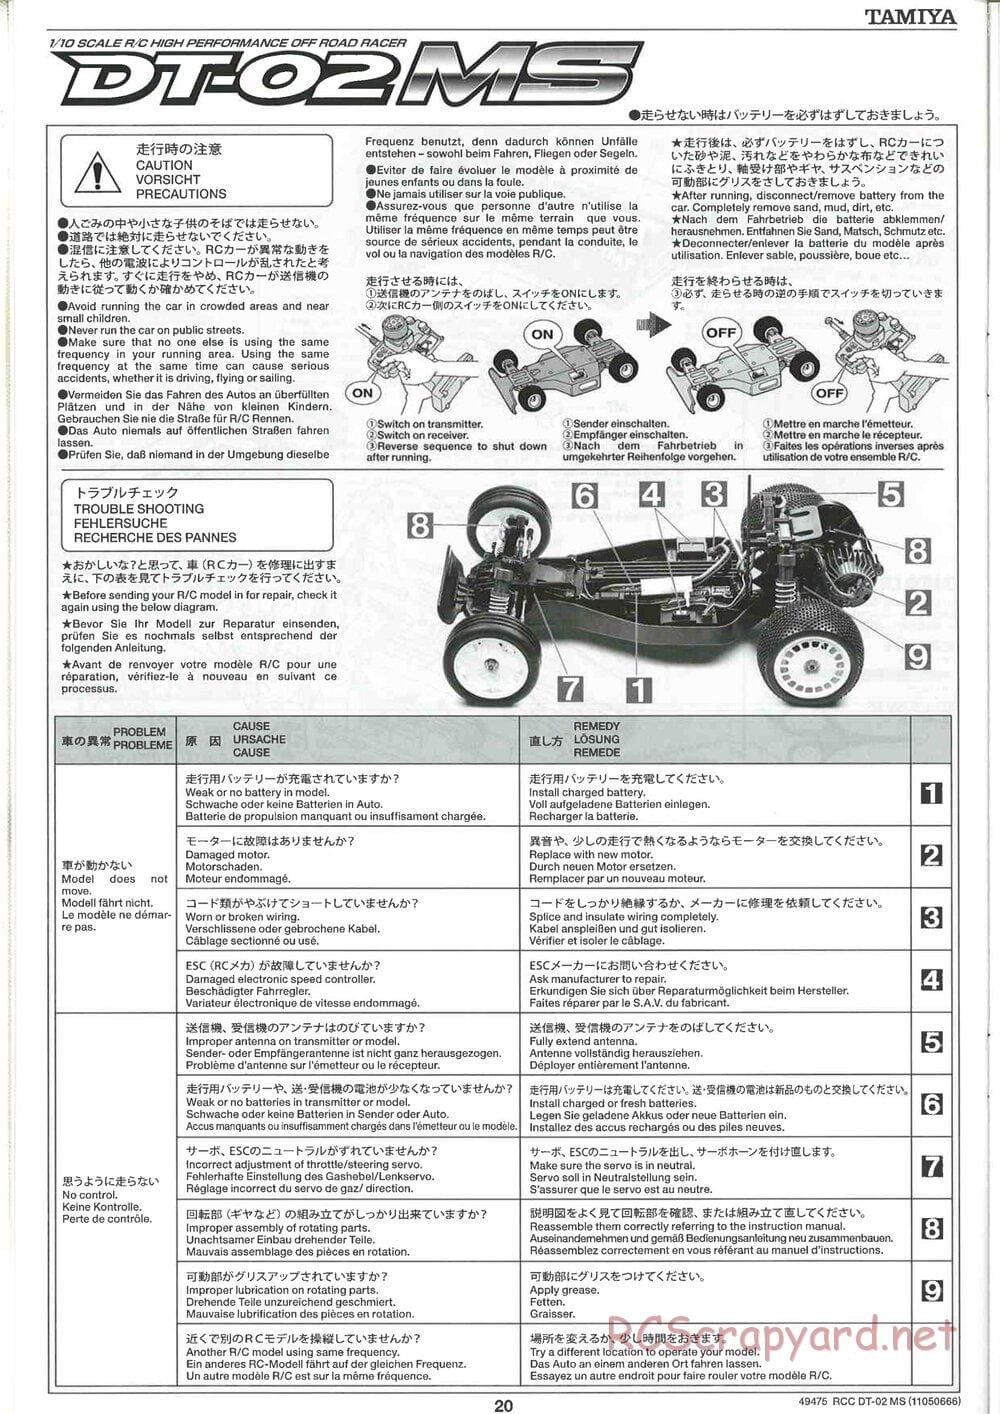 Tamiya - DT-02 MS Chassis - Manual - Page 21